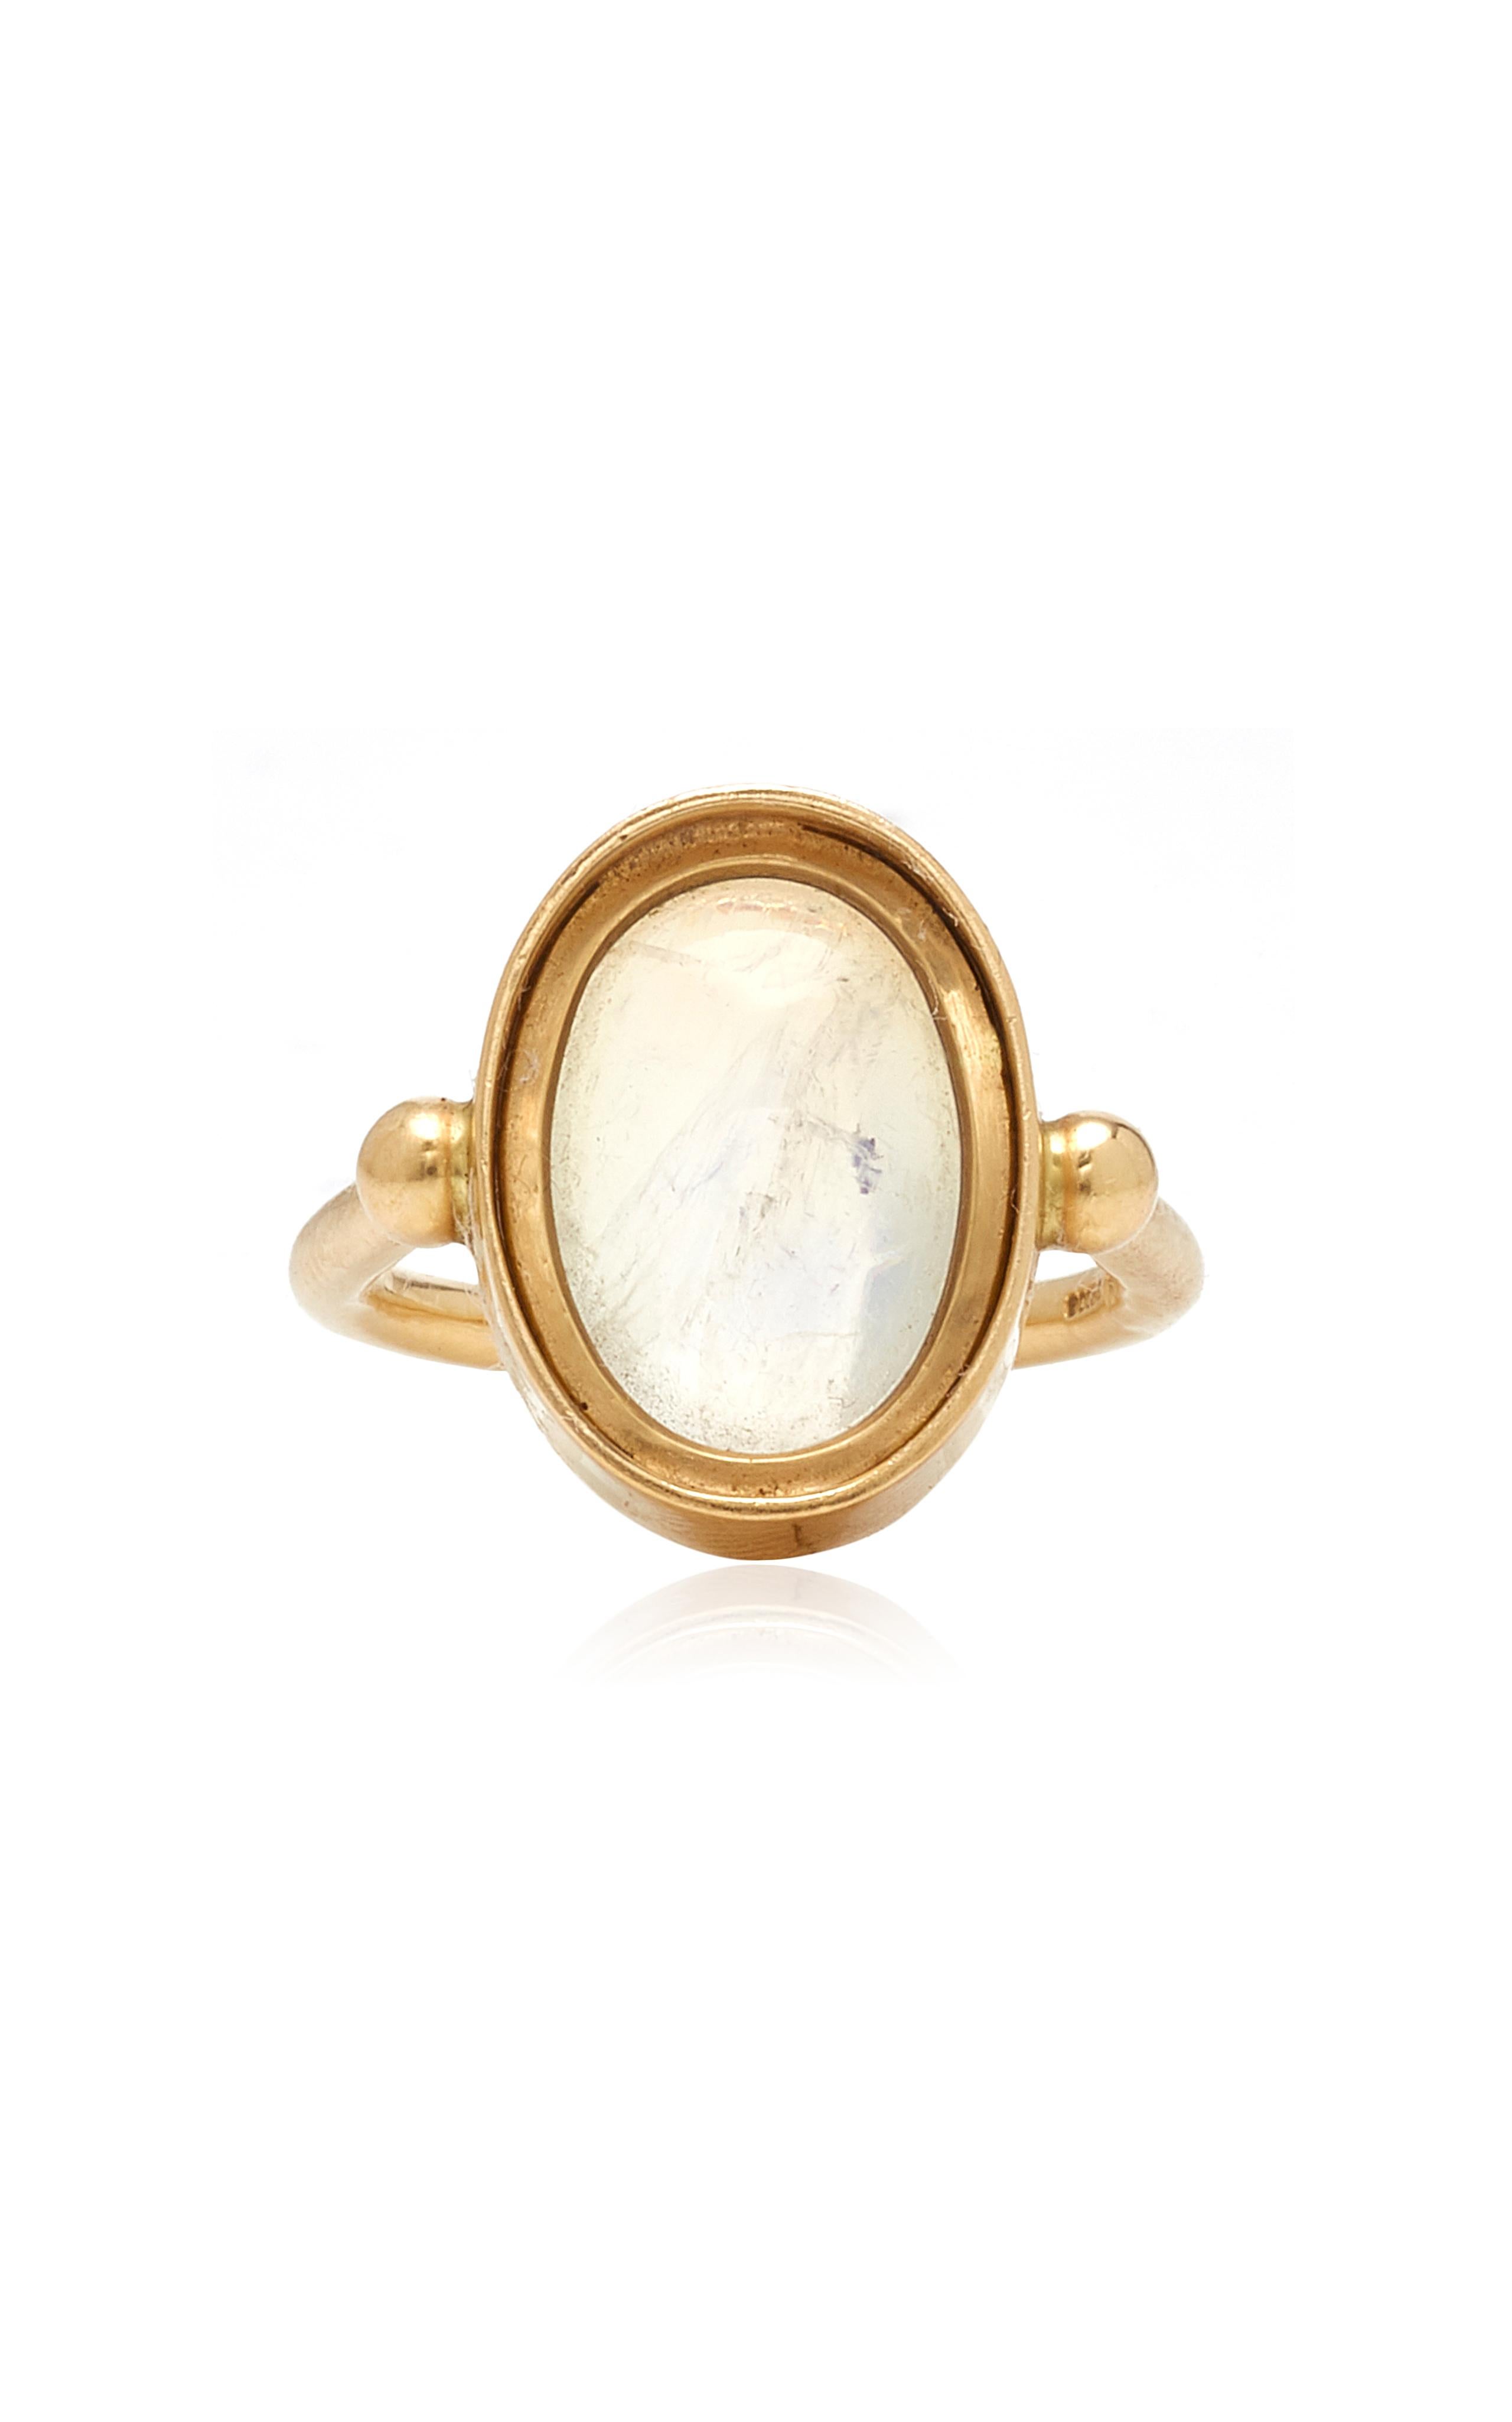 PORTRAIT OVAL RAINBLING RING
Oval cabochon rainbow moonstone set in 18kt gold ring.

 If this item is out of stock. Everything is made to order and can take 4-6 weeks.

OUROBOROS is an artisanal brand, based out of Jaipur and designed by the British